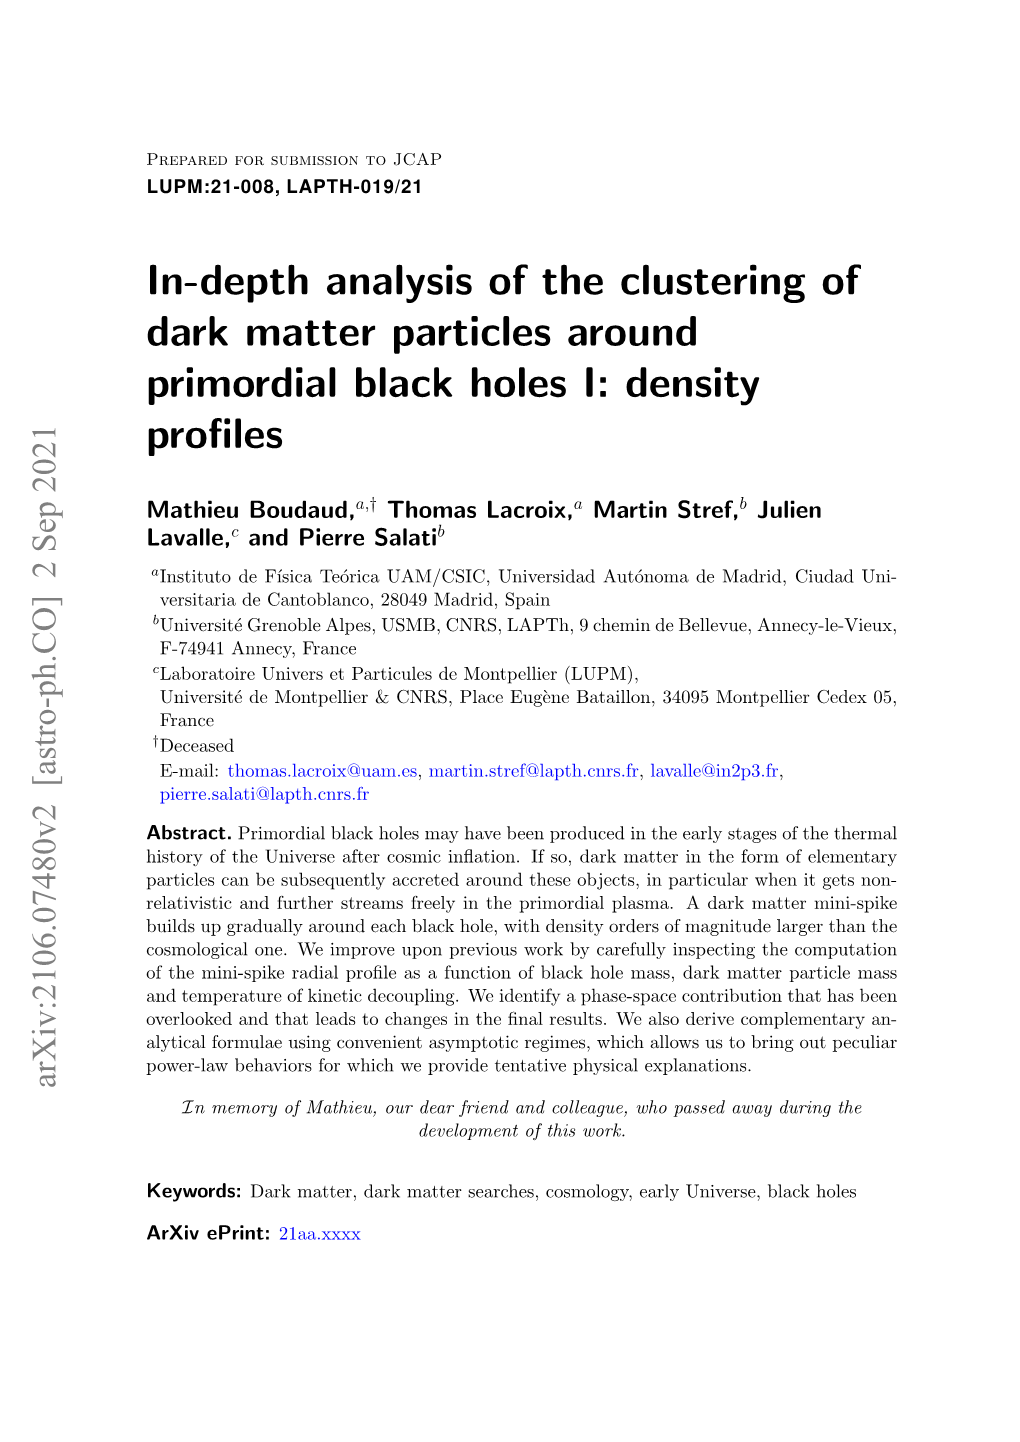 In-Depth Analysis of the Clustering of Dark Matter Particles Around Primordial Black Holes I: Density Profiles